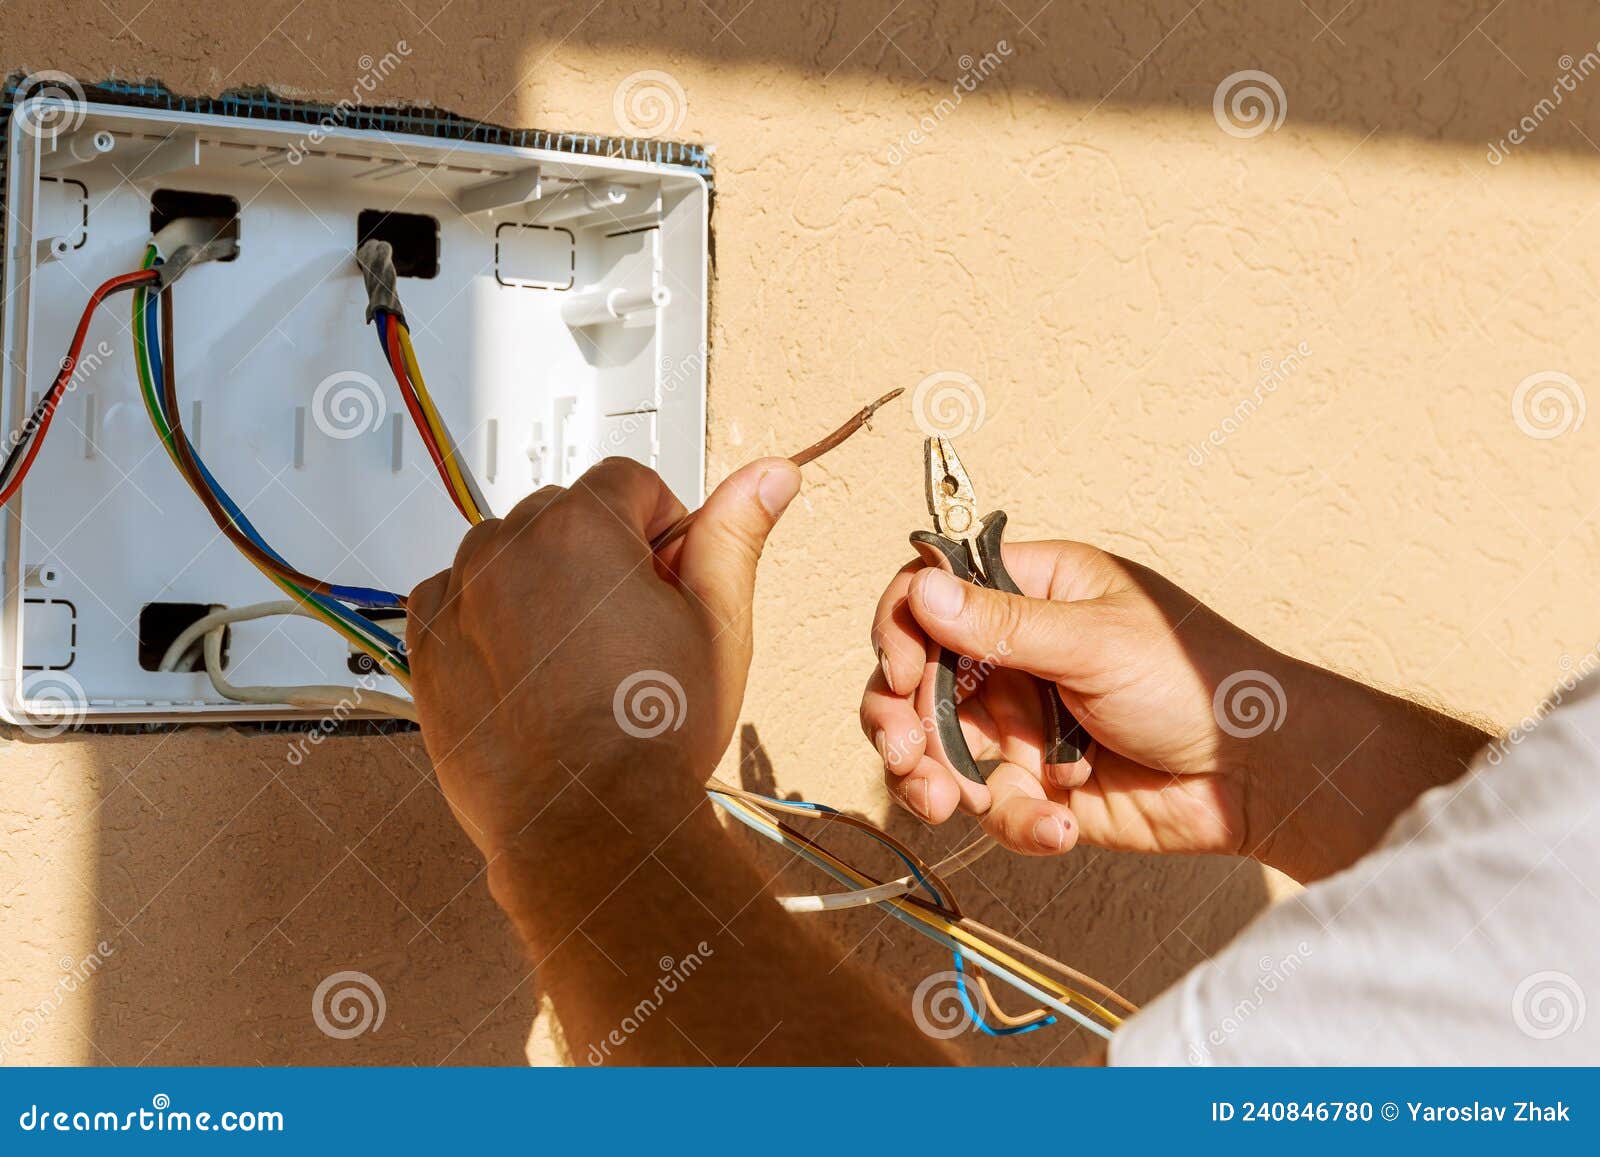 an electrician repairs an electrical wire for connecting an electrical panel.